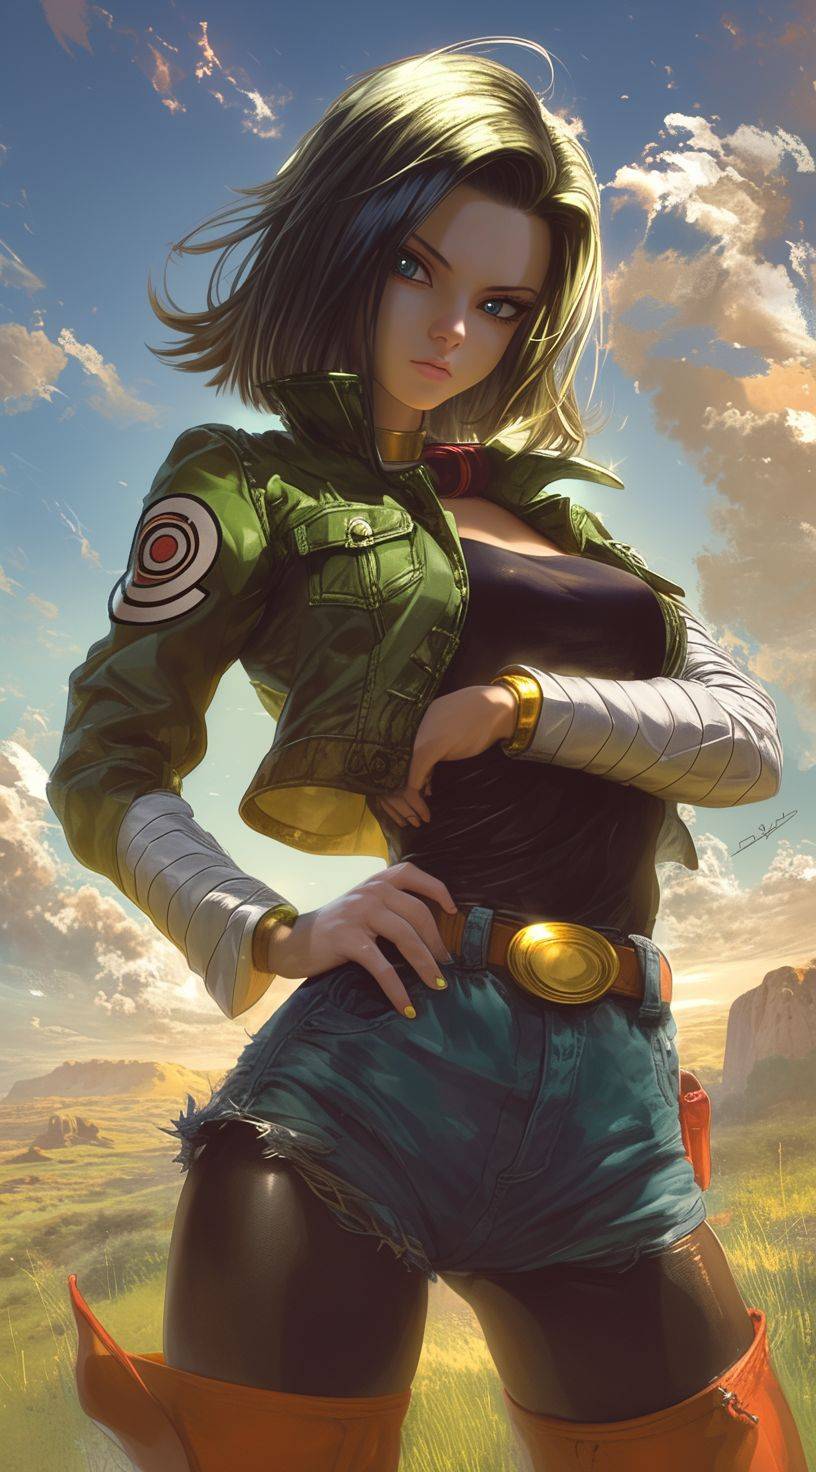 Dragon Ball Super character Android 17, in the style of Hajime Sorayama, textured surface layers, gold and emerald, dynamic outdoor shots, realist detail, expansive skies